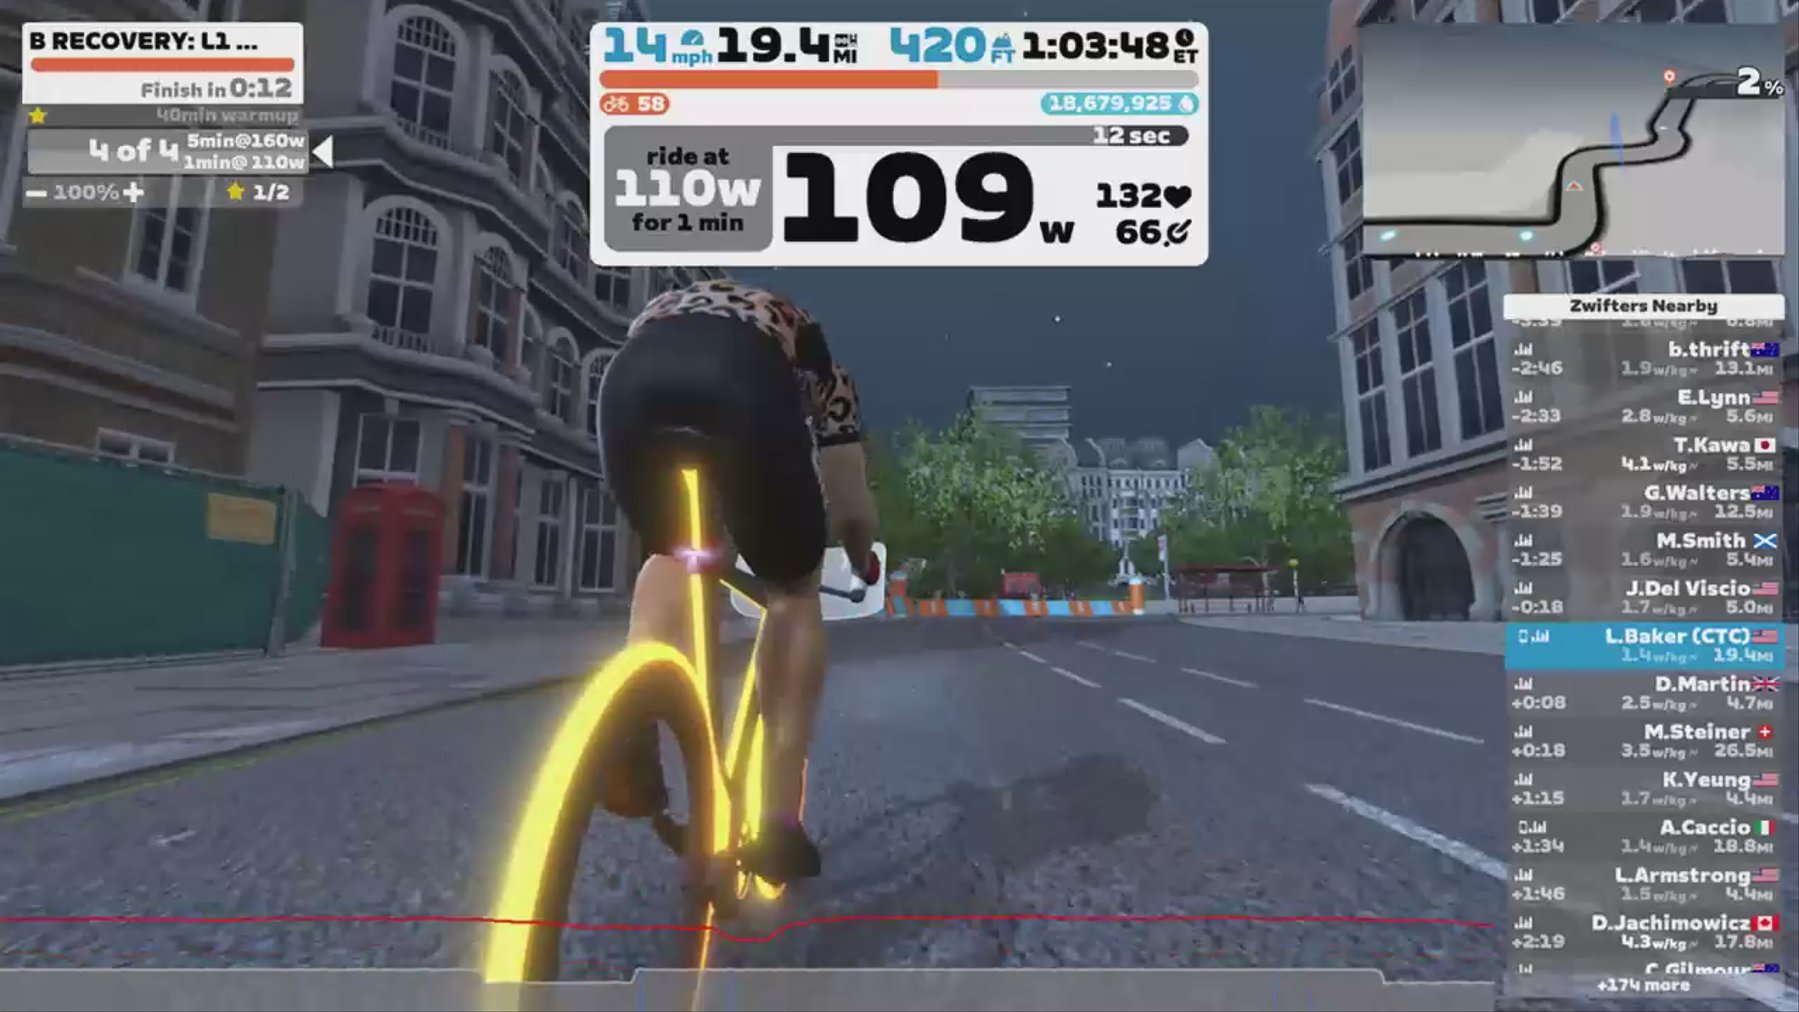 Zwift - B RECOVERY: L1 Recovery ride with reps of 5 min L2 in London